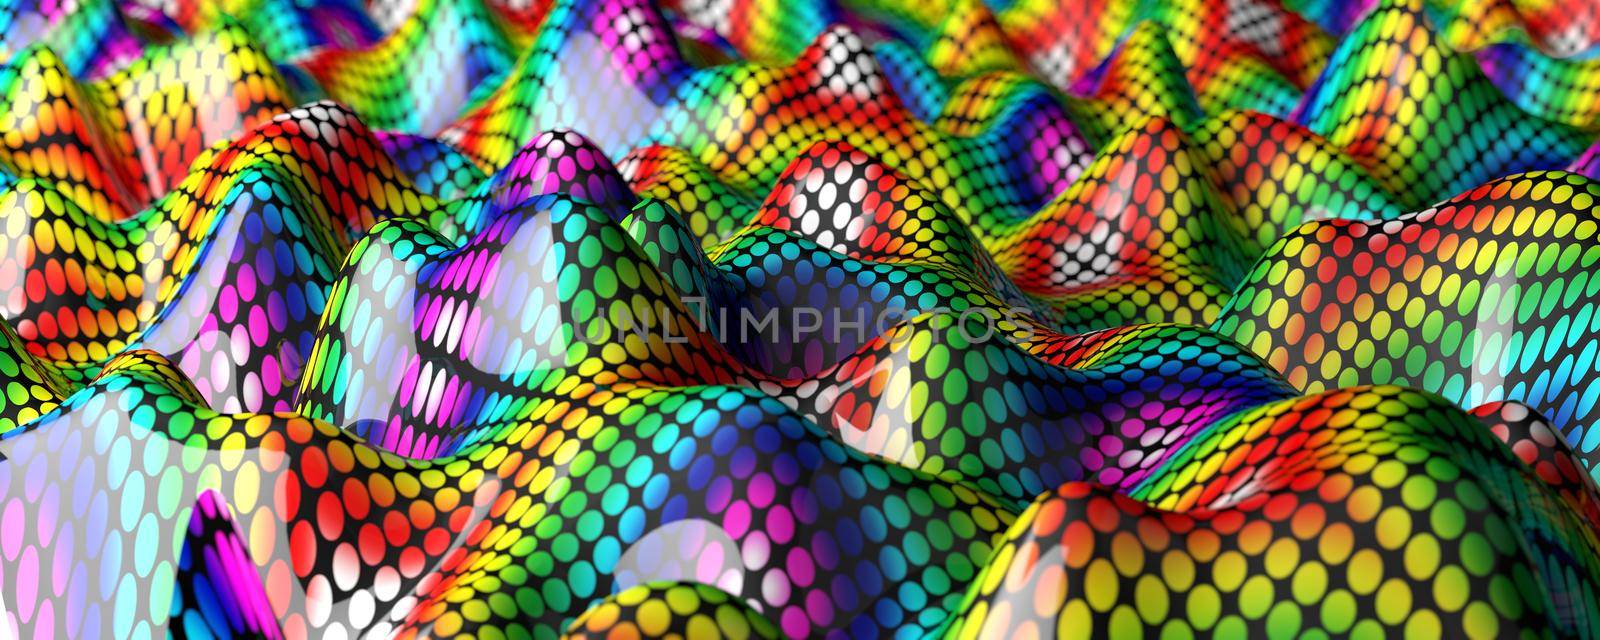 Abstract colorful background by carloscastilla